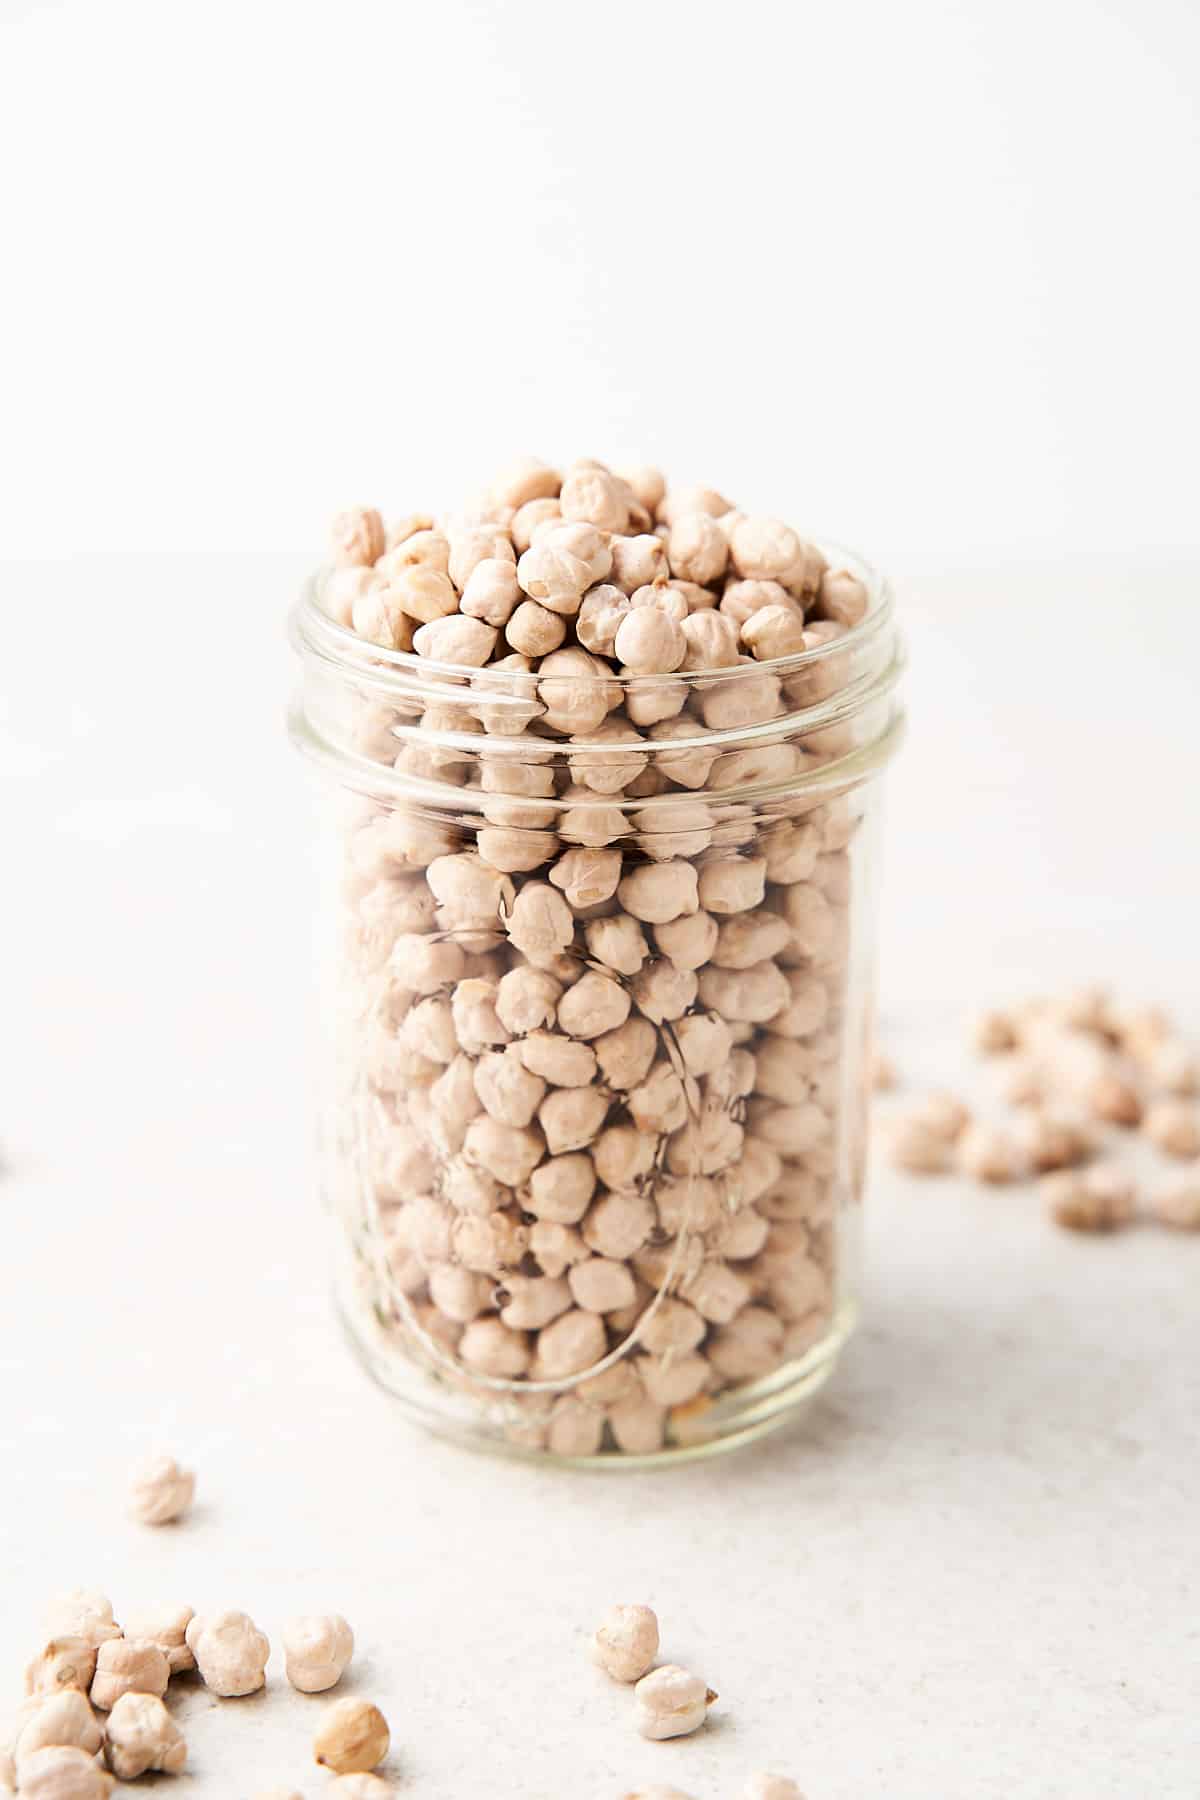 Dried chickpeas in a jar.